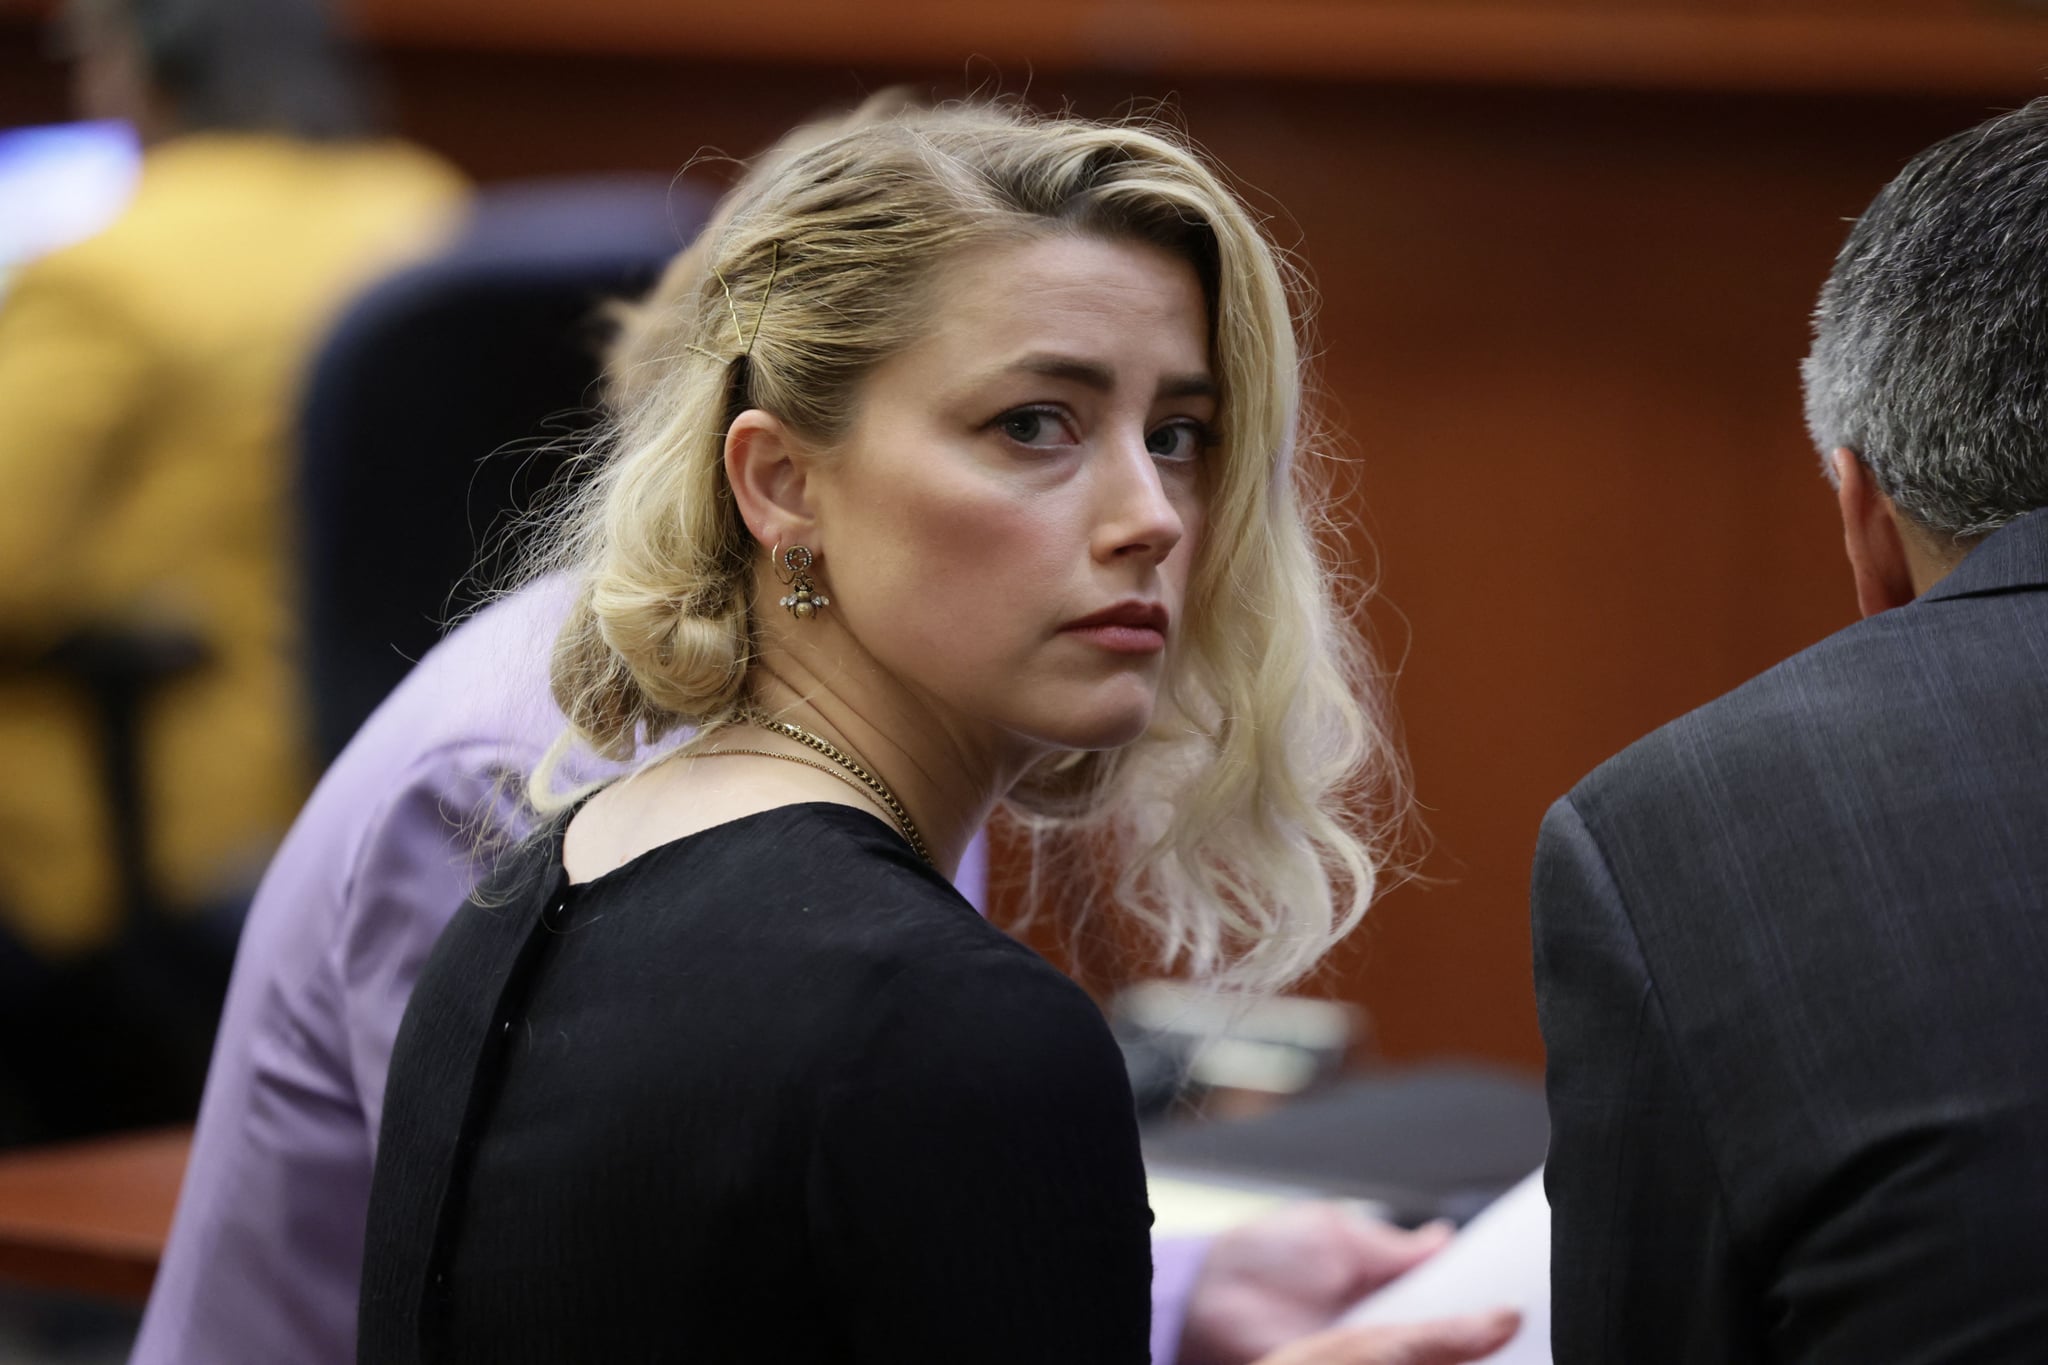 US actress Amber Heard waits before the jury said that they believe she defamed ex-husband Johnny Depp, while announcing split verdicts in favour of both her ex-husband Johnny Depp and Heard on their claim and counter-claim in the Depp v. Heard civil defamation trial at the Fairfax County Circuit Courthouse in Fairfax, Virginia, on June 1, 2022. - A US jury on Wednesday found Johnny Depp and Amber Heard defamed each other, but sided far more strongly with the 